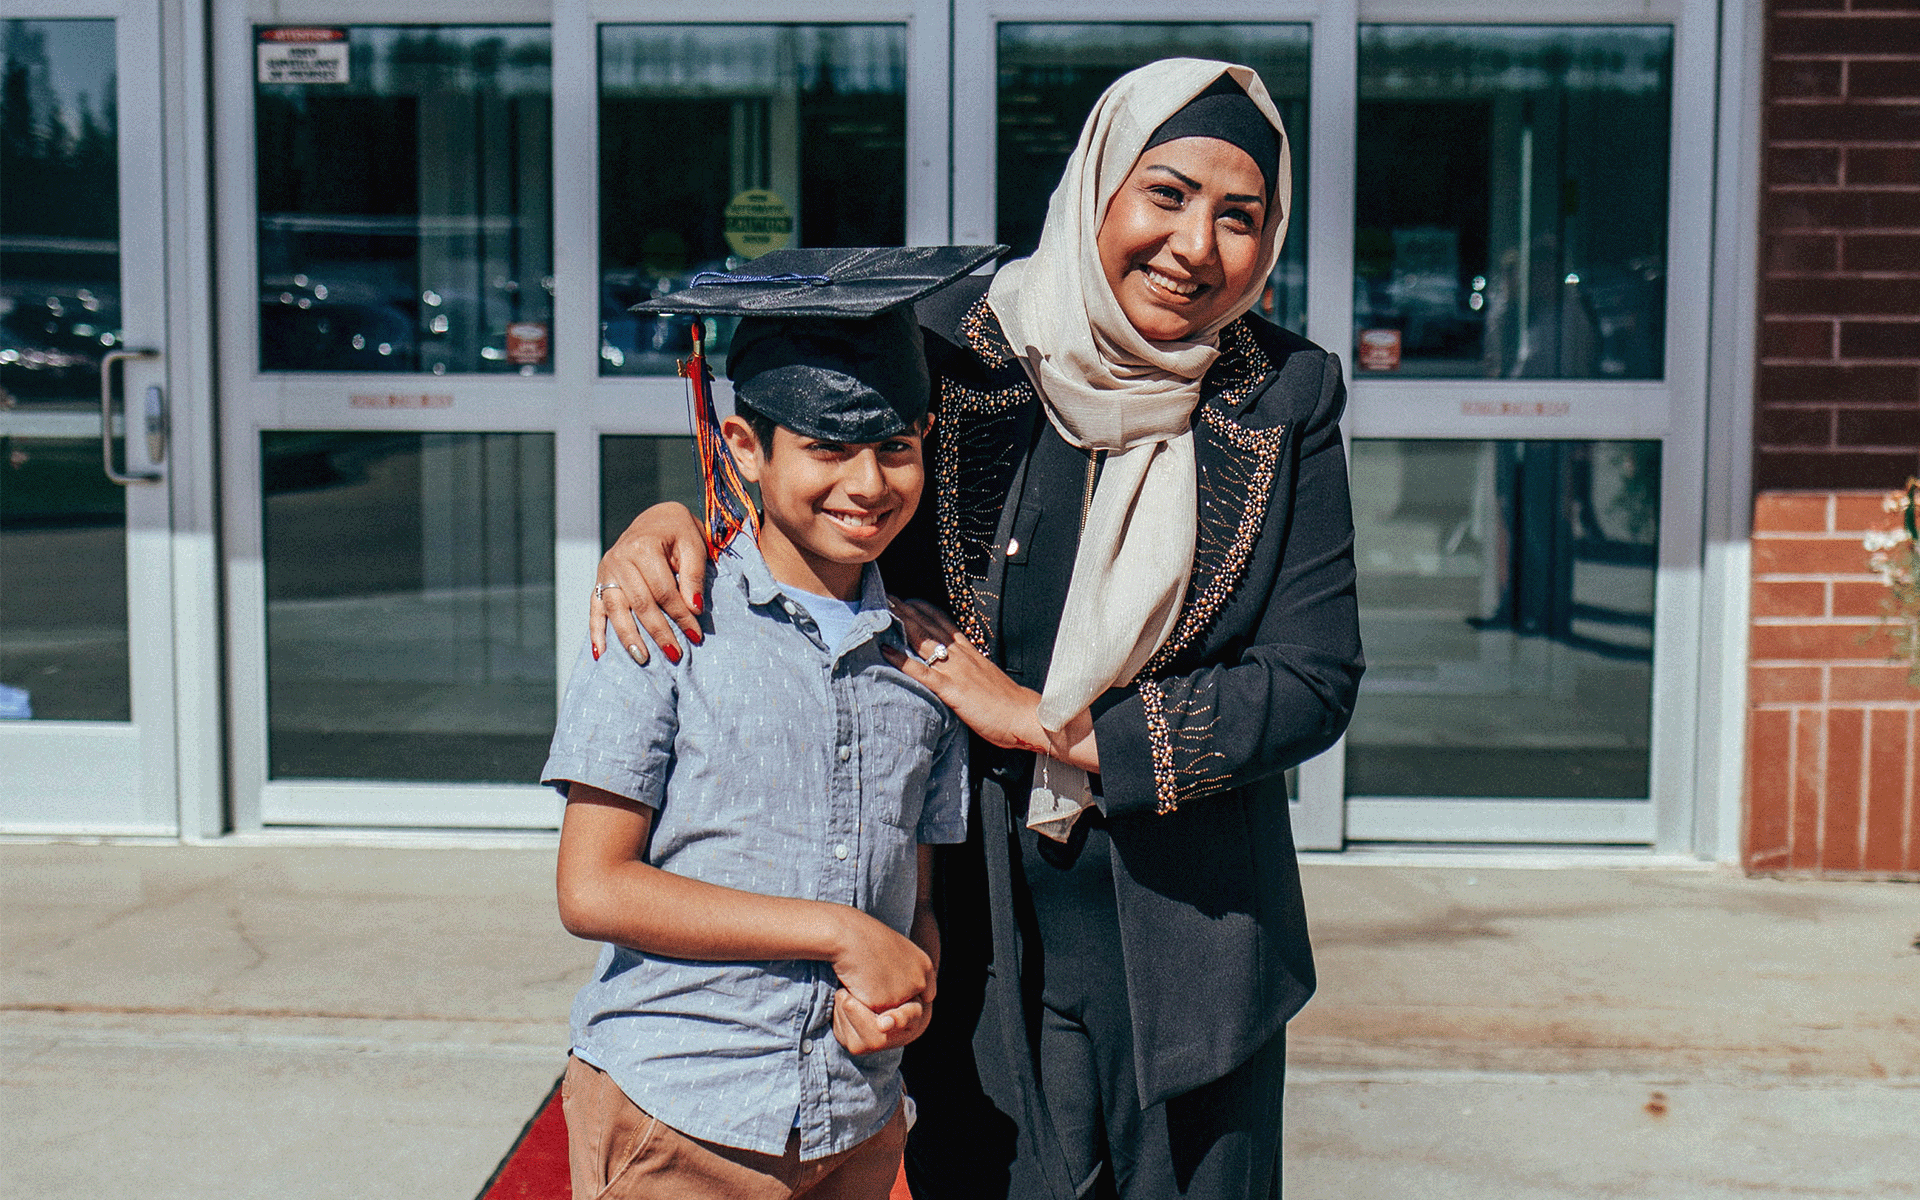 Young boy wearing grad cap and woman standing next to him. Both of them are smiling at the camera